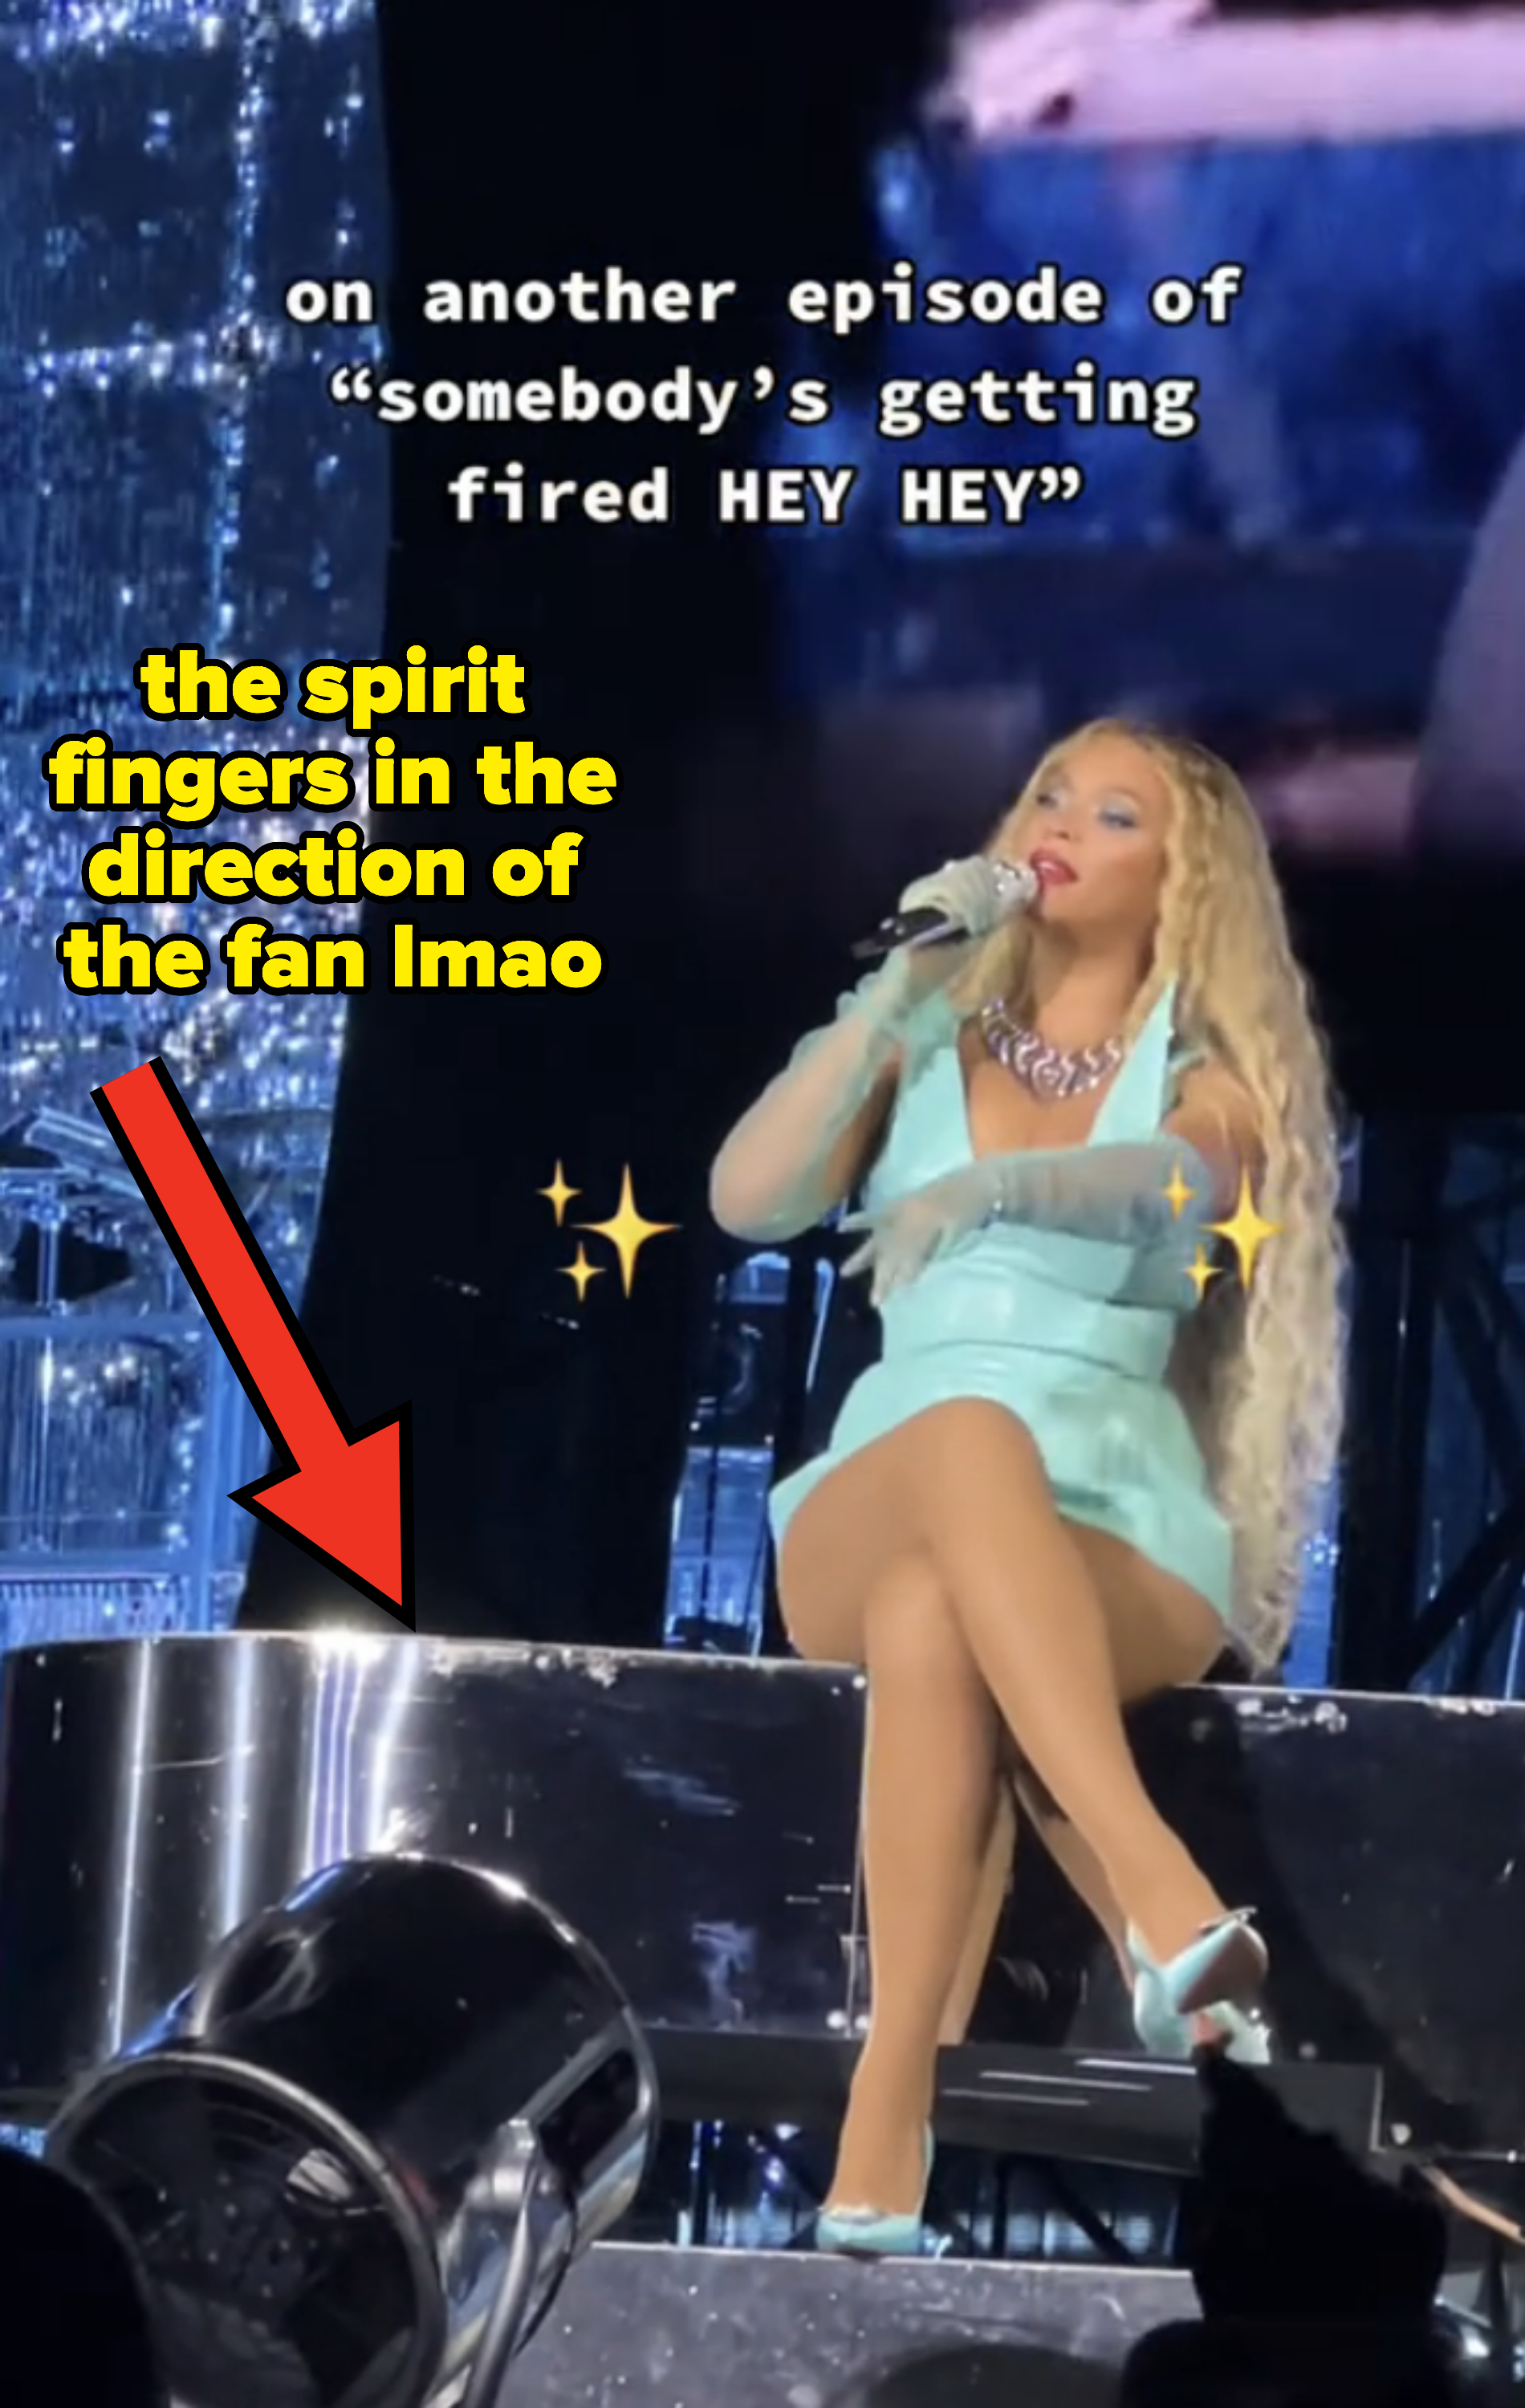 Beyoncé sitting and performing on stage and gesturing to a fan that is not on